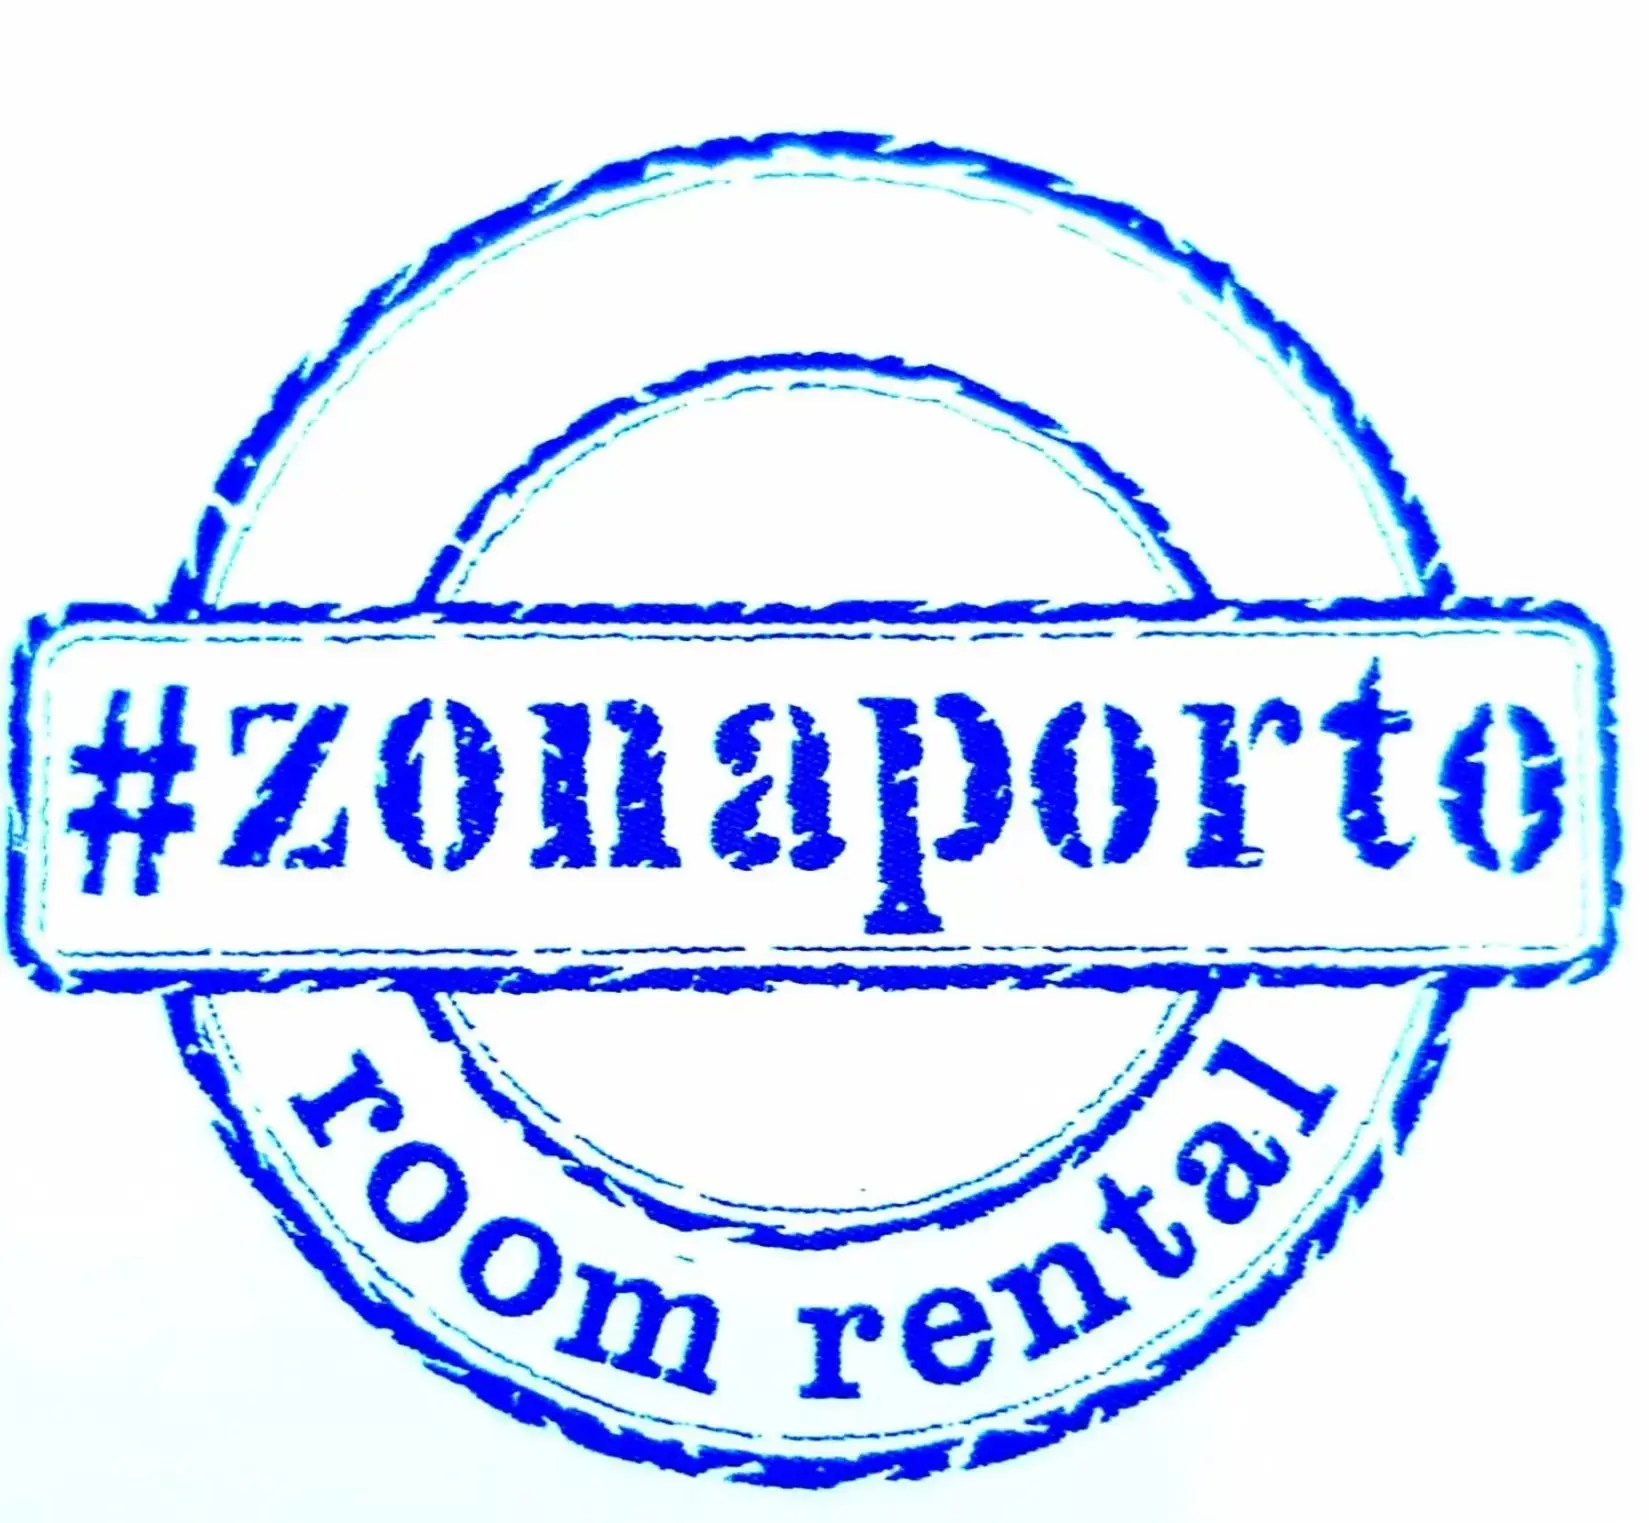 Property logo or sign in #Zonaporto